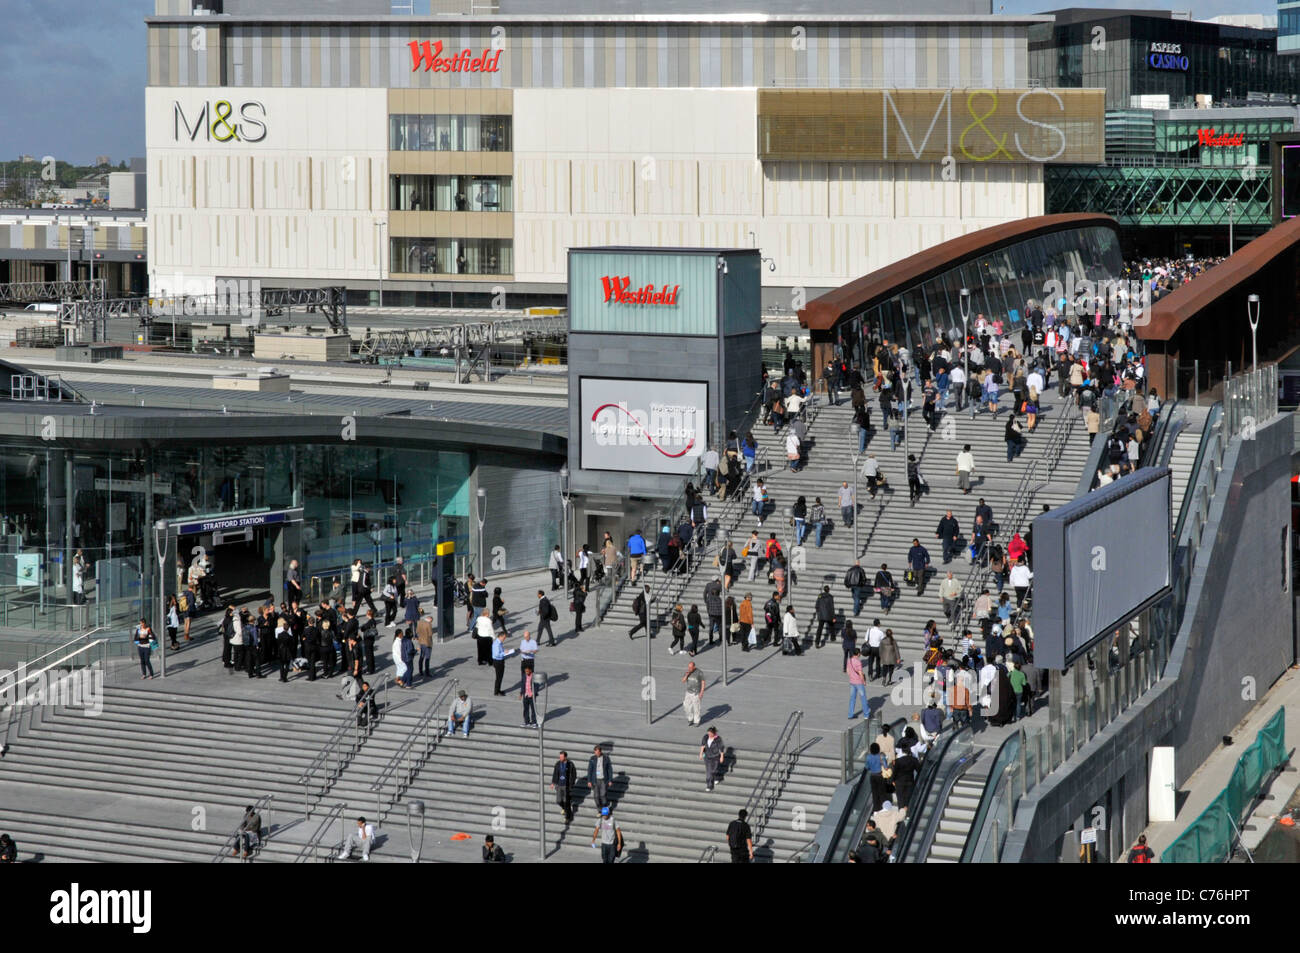 Westfield Shopping Centre & Marks and Spencer store building above entrance for people shoppers on bridge with station exit Stratford East London UK Stock Photo